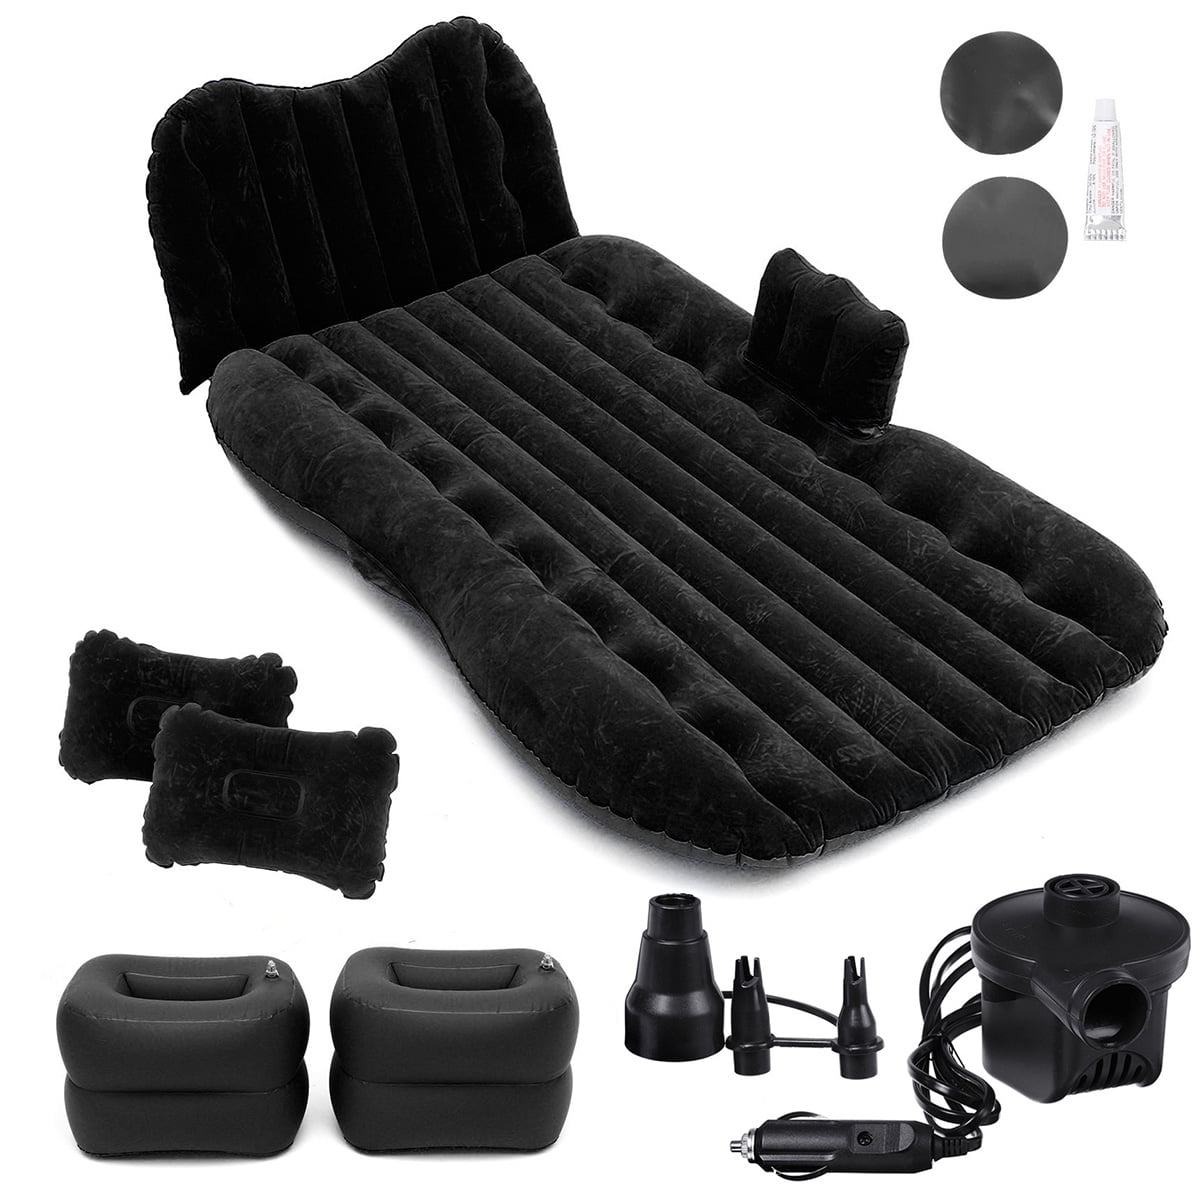 Details about   SUV Car Air Bed Inflatable Mattress w/2 Pillows+2 Stools+Pump Set Trave 